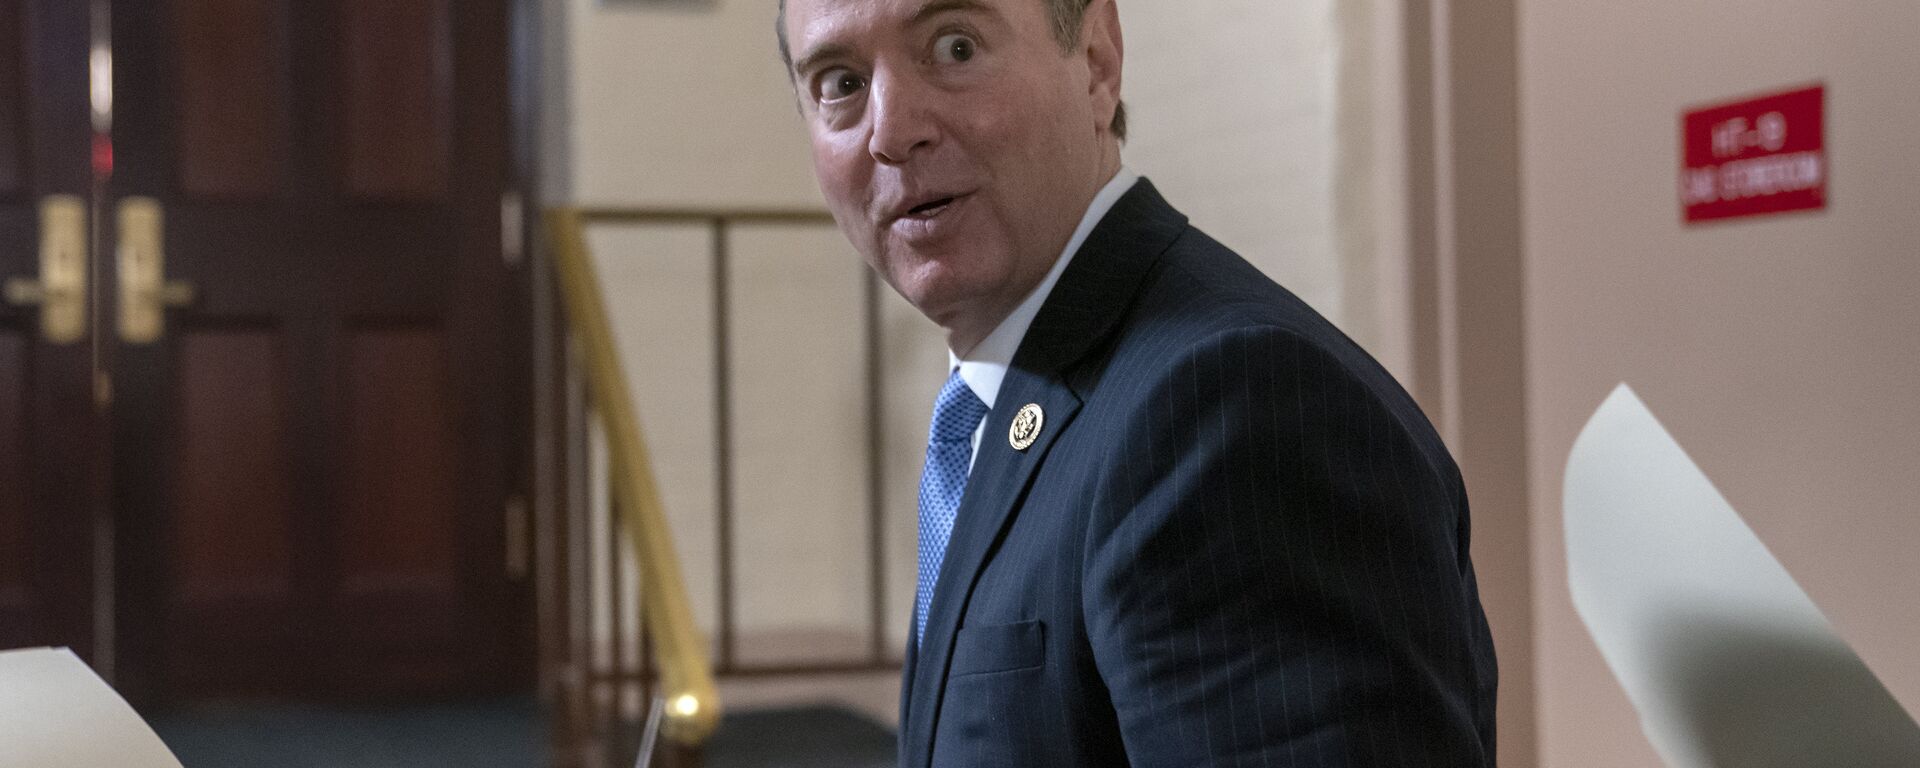 House Intelligence Committee Chairman Adam Schiff, D-Calif., arrives for a Democratic Caucus meeting at the Capitol in Washington, Tuesday, March 26, 2019. Schiff, the focus of Republicans' post-Mueller ire, says Mueller's conclusion would not affect his own committee's counterintelligence probes. - Sputnik International, 1920, 17.12.2021